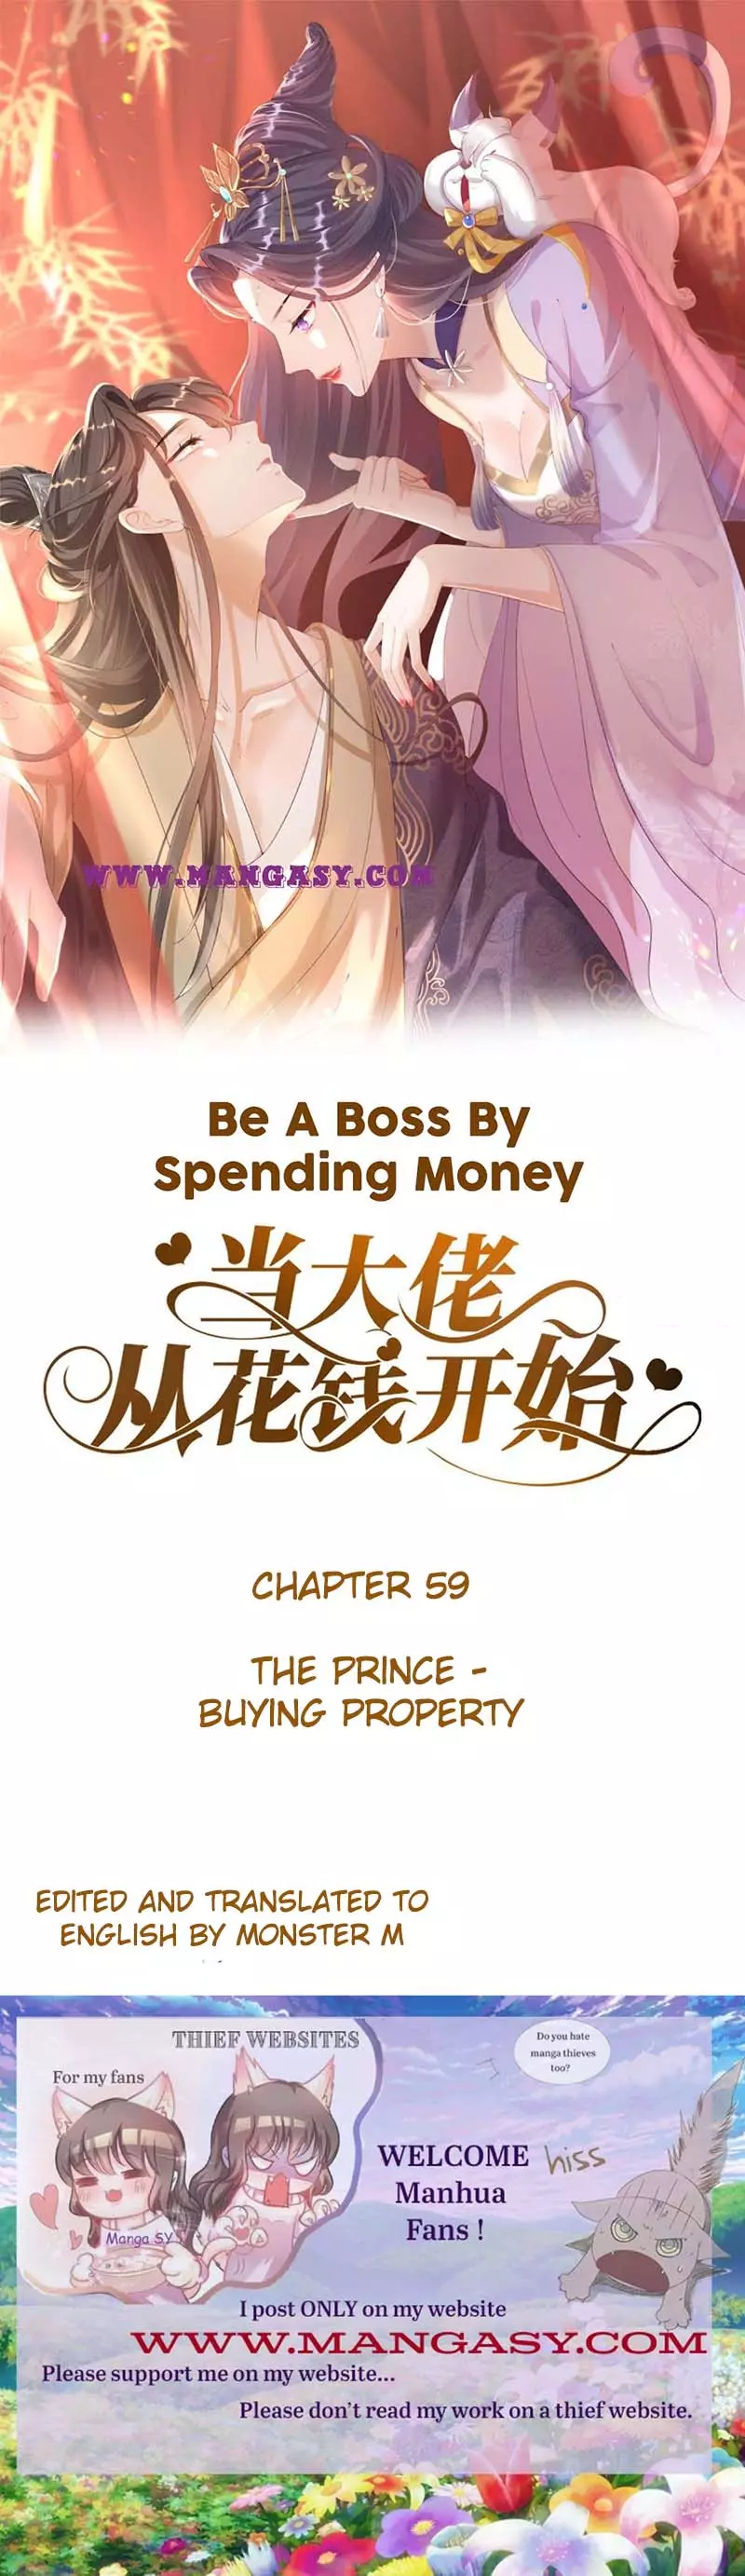 Becoming A Big Boss Starts With Spending Money - 59 page 1-9328e992